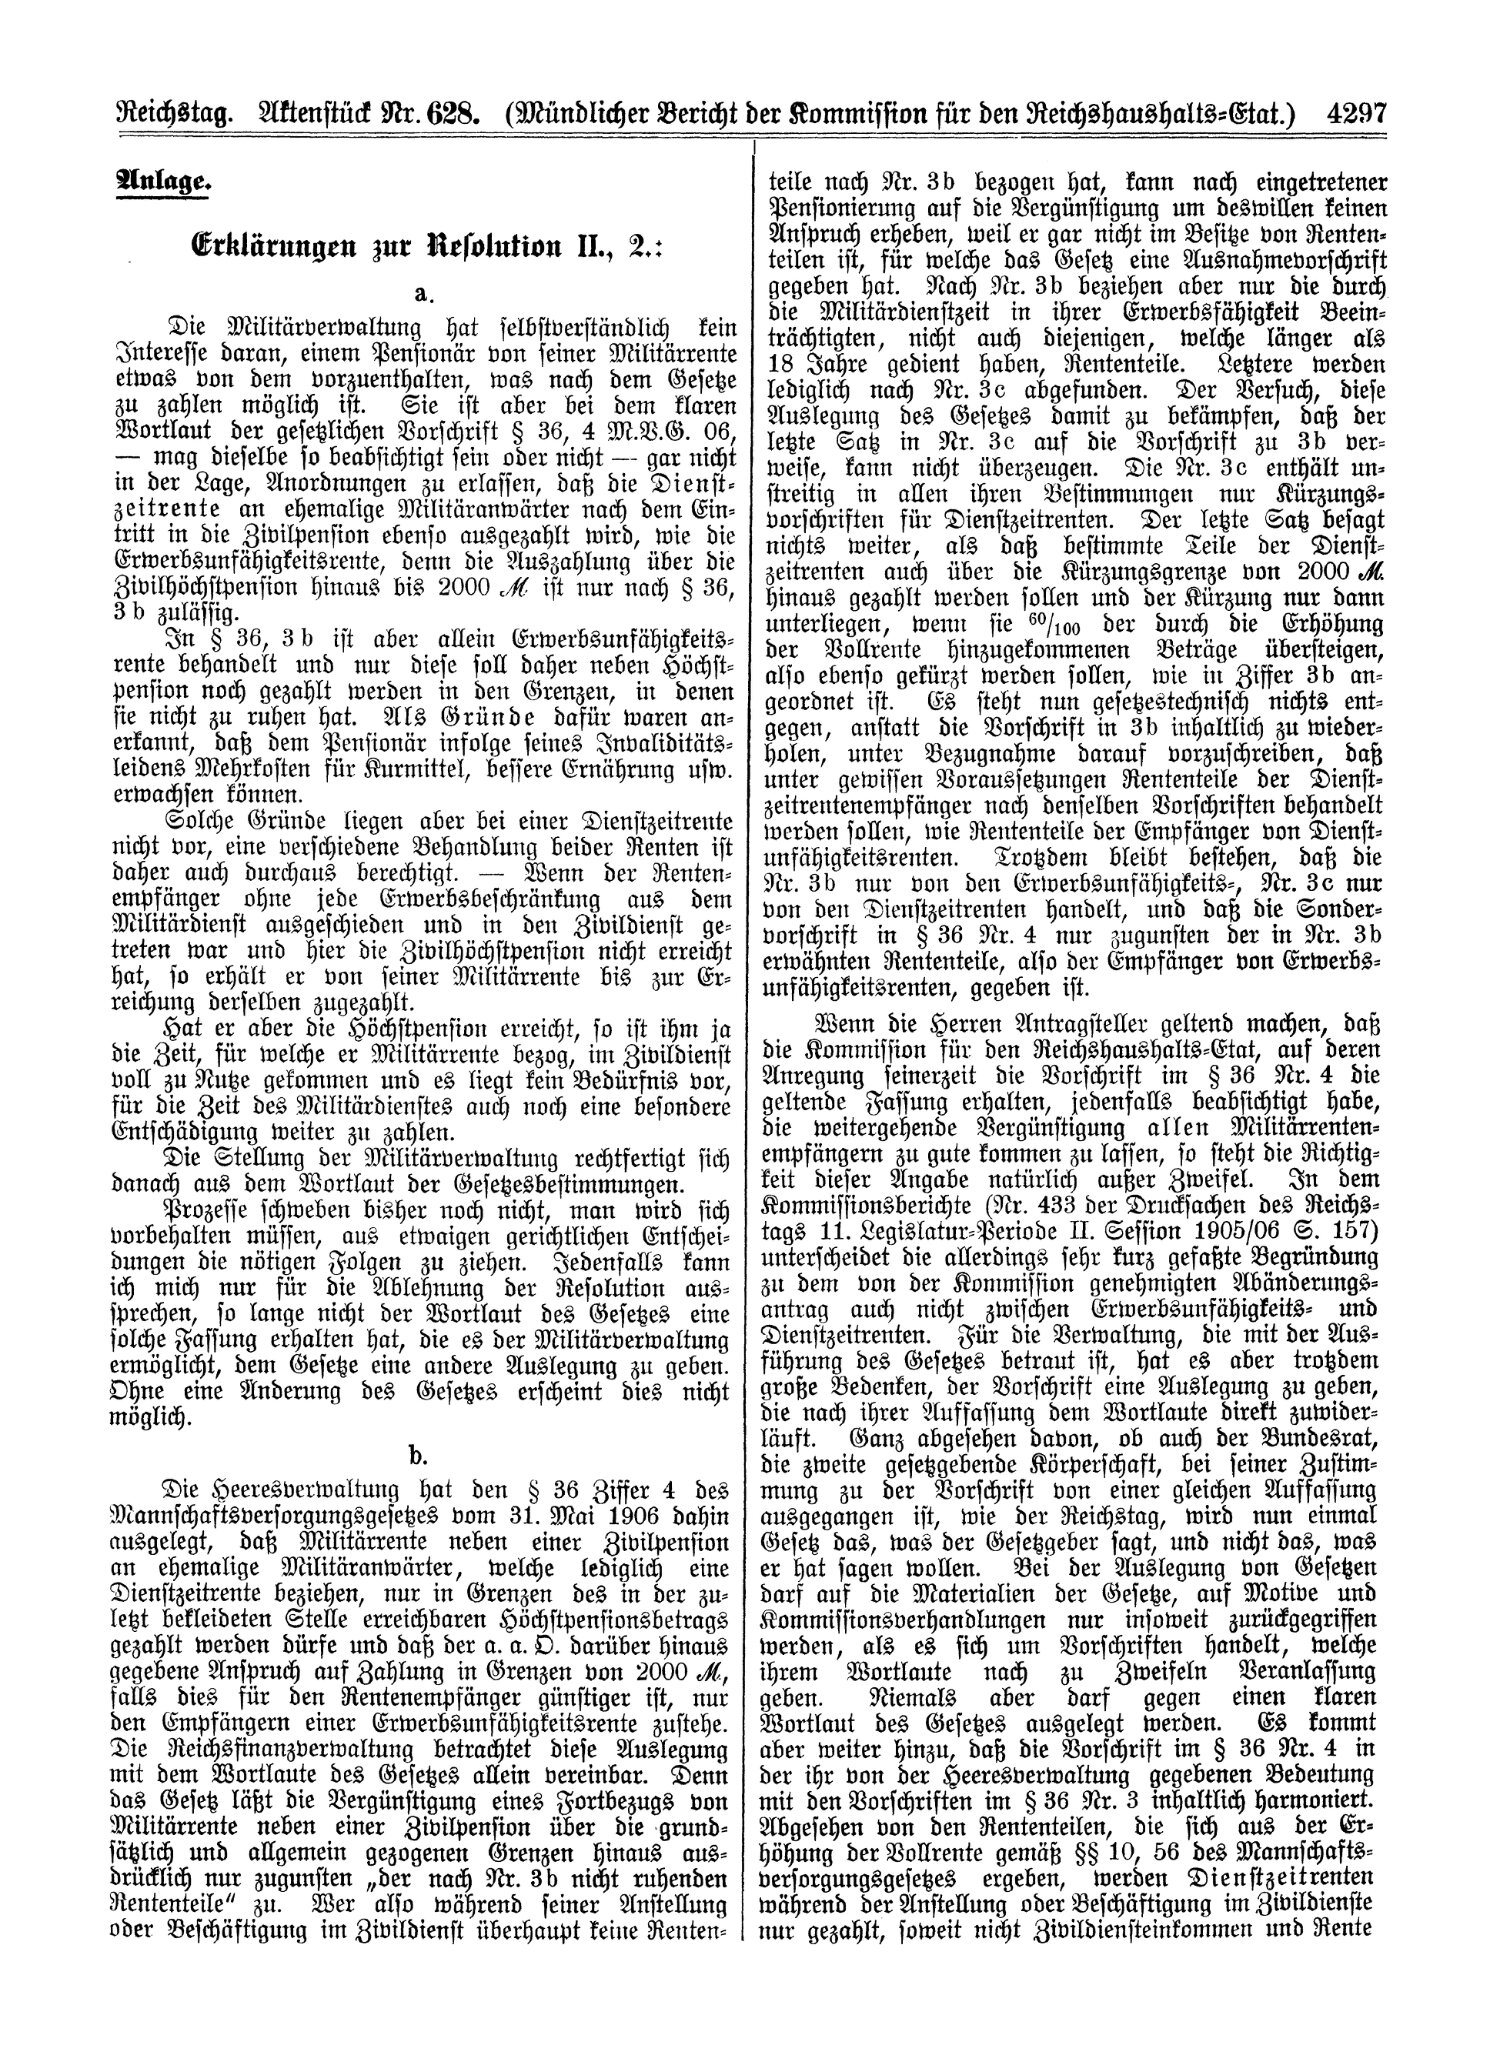 Scan of page 4297